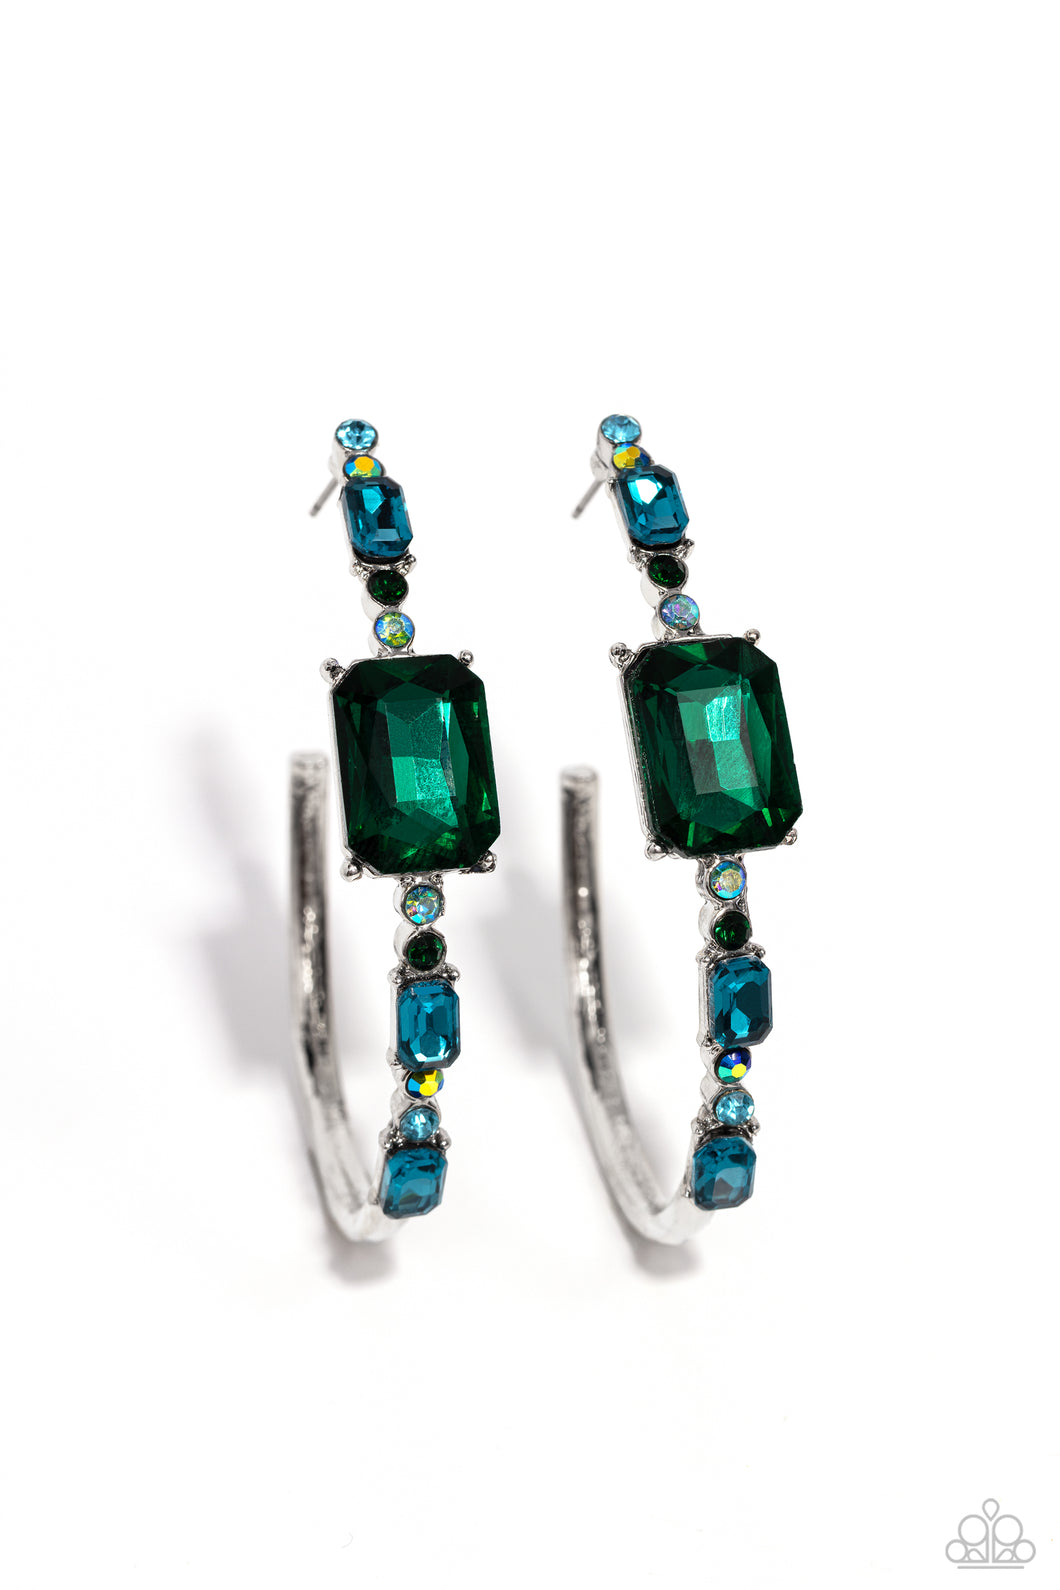 Encrusted in round and emerald-cut aquamarine and emerald gems, some featuring an iridescent sheen, an exaggerated oblong silver hoop curls around the ear, refracting light in a dramatic, knockout finish. Earring attaches to a standard post fitting. Hoop measures approximately 2